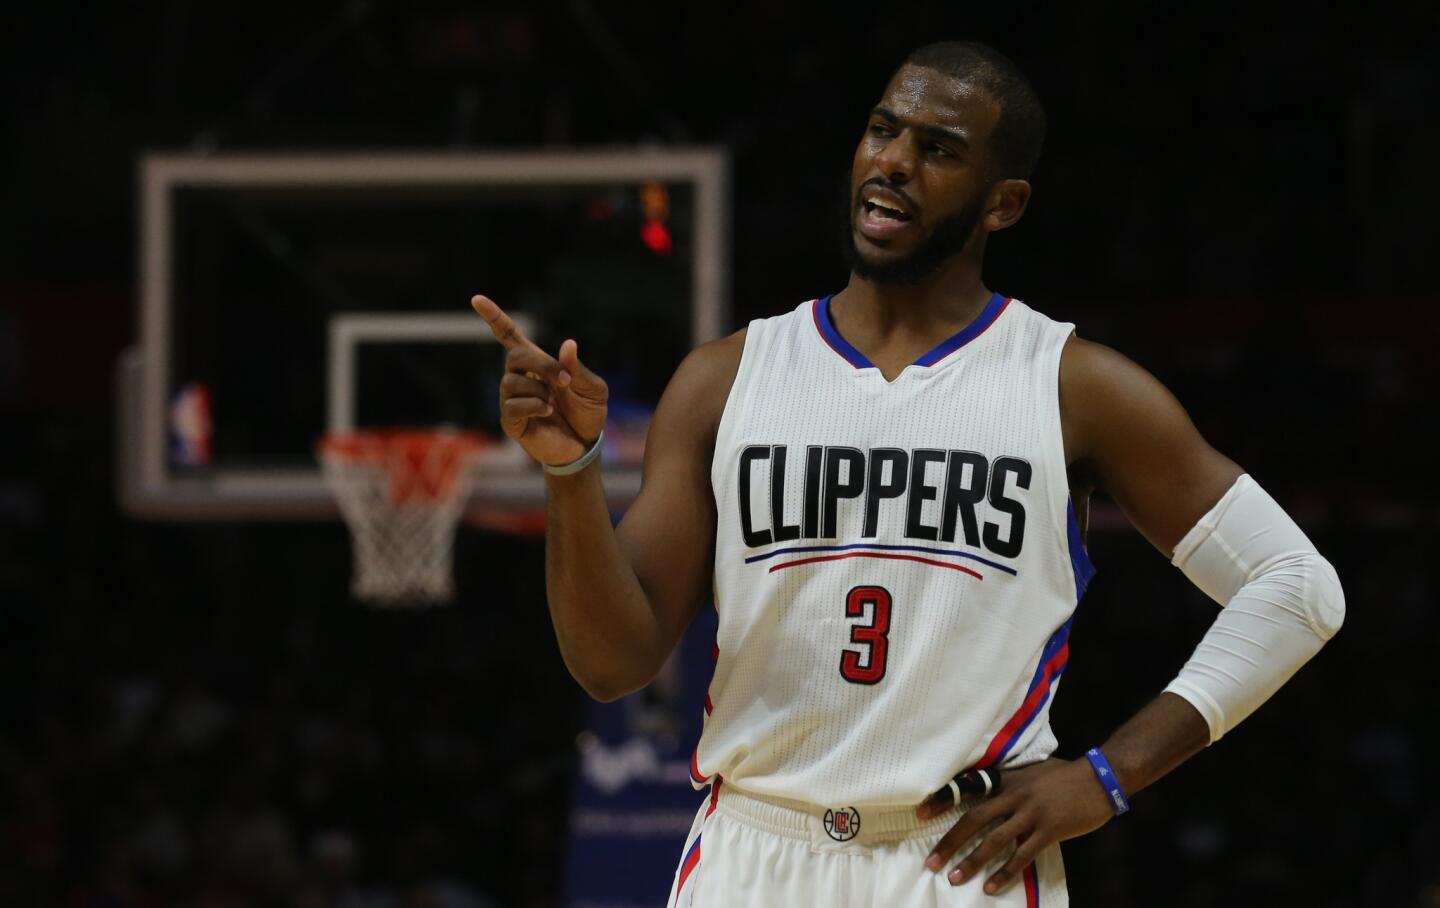 Clippers point guard Chris Paul takes the floor against the Bucks.